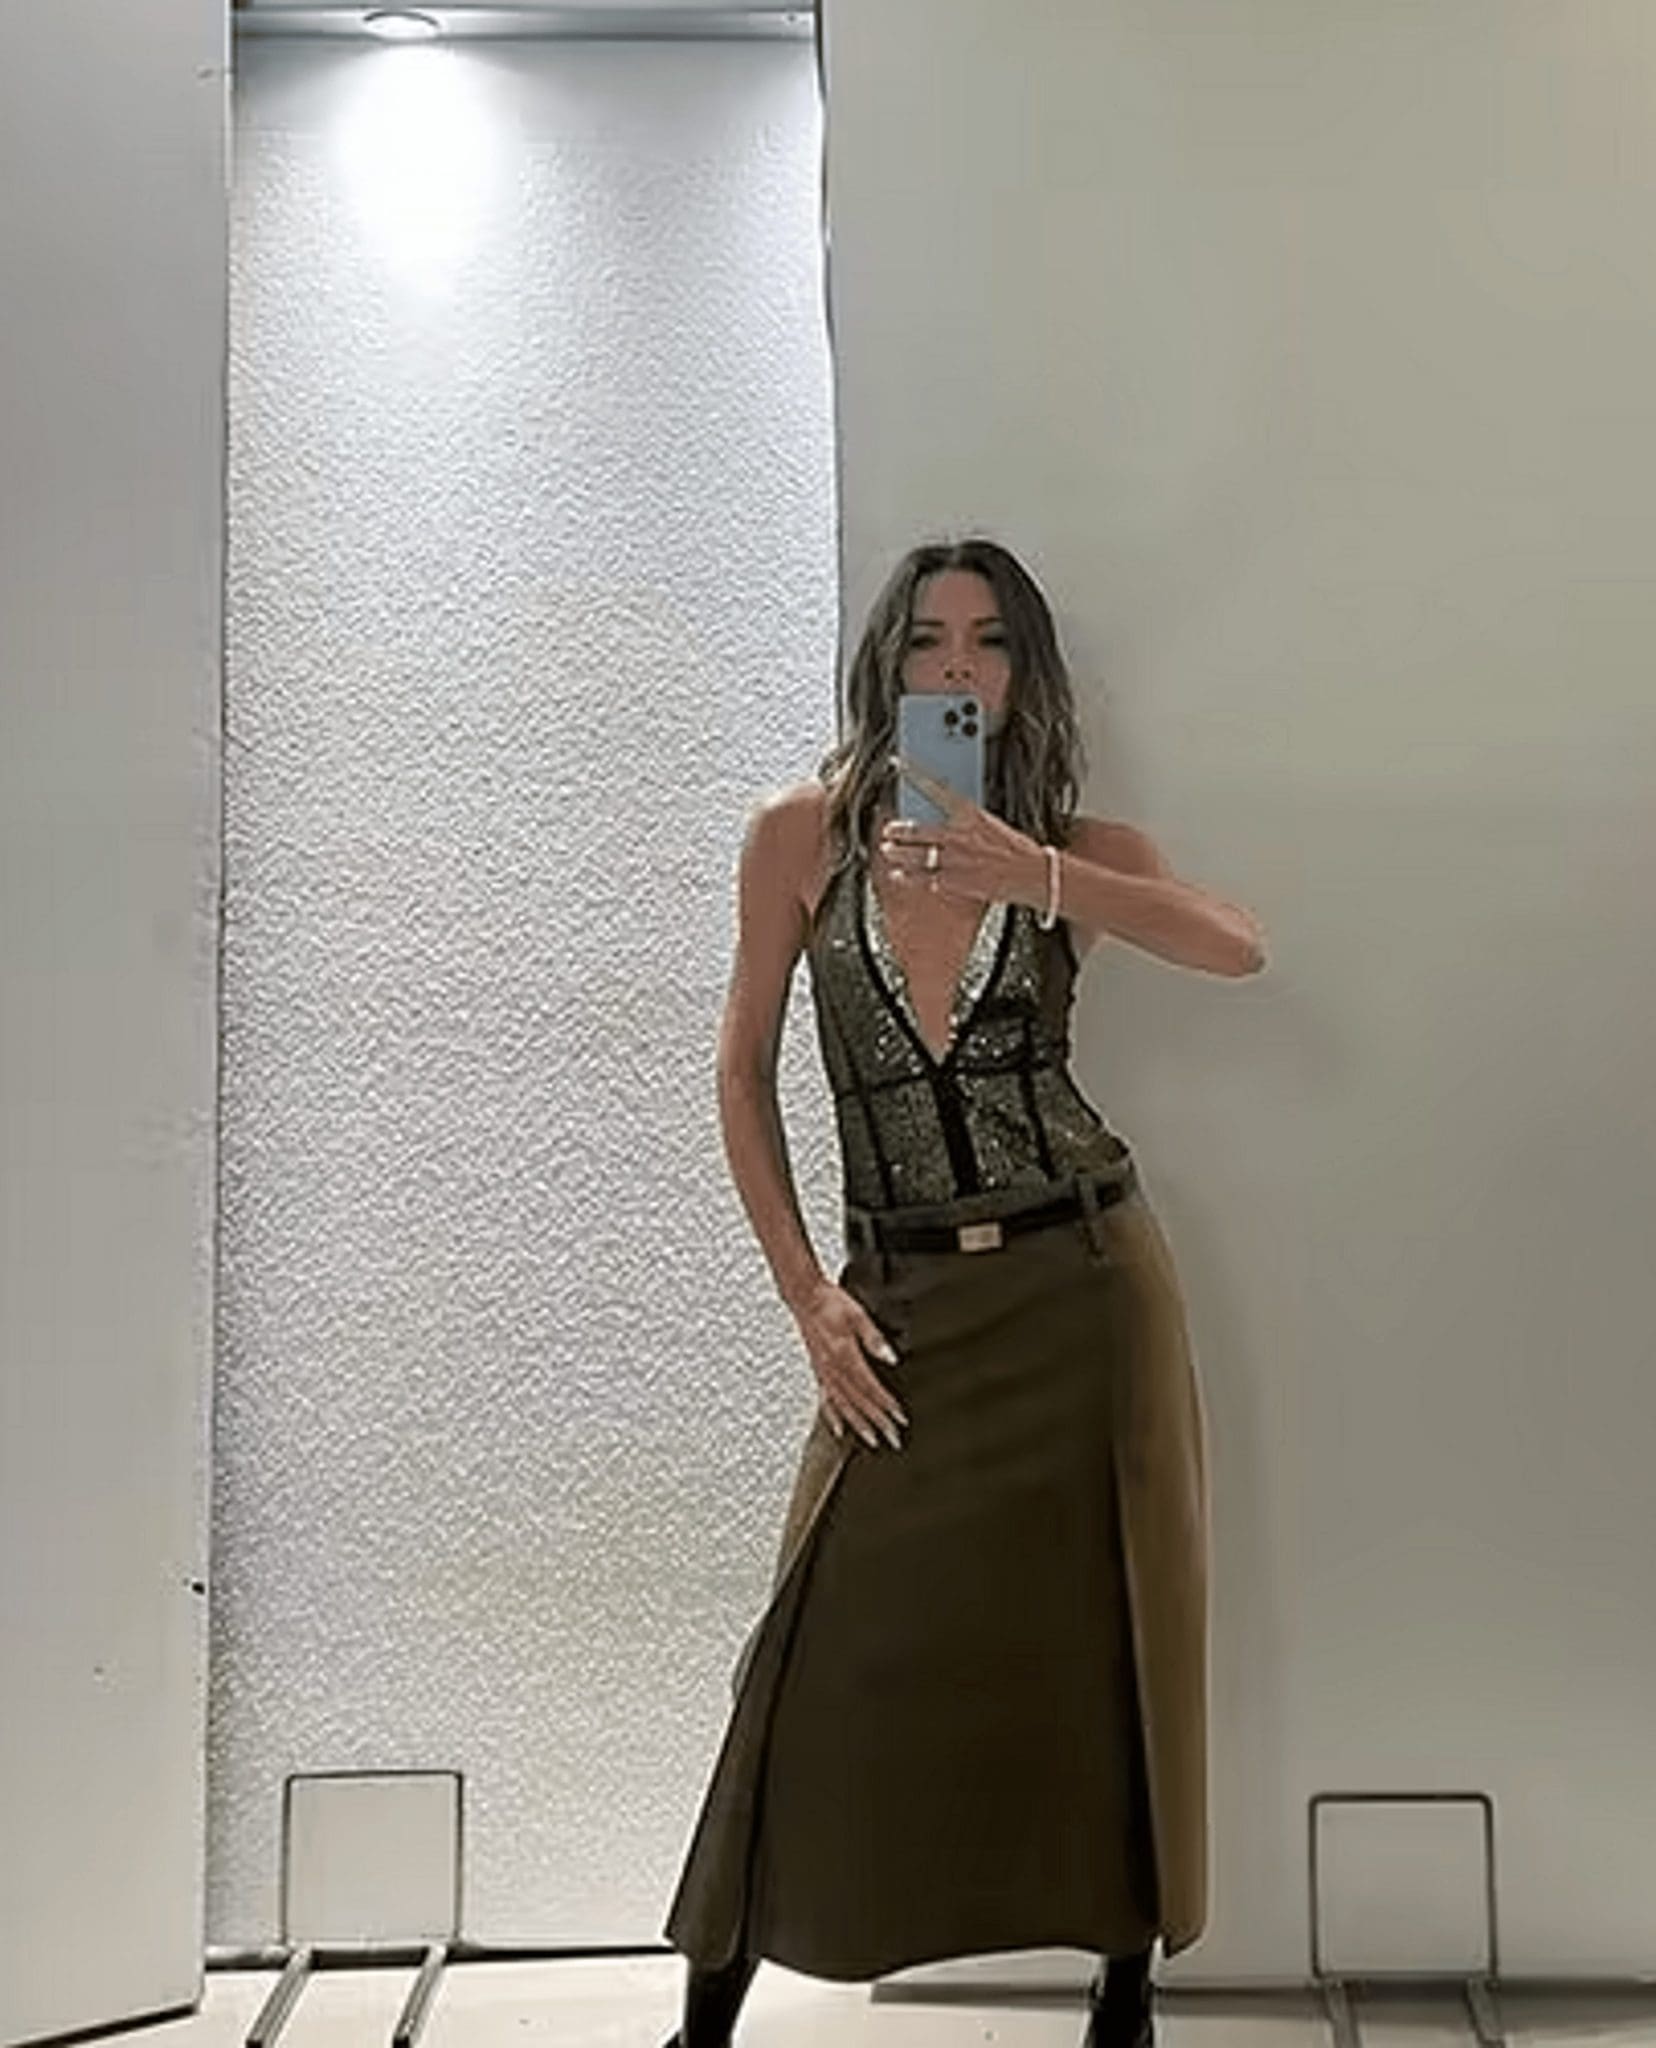 Fans Are Chatting About Victoria Beckham's Revealing Mesh Top And Mermaid Bodysuit